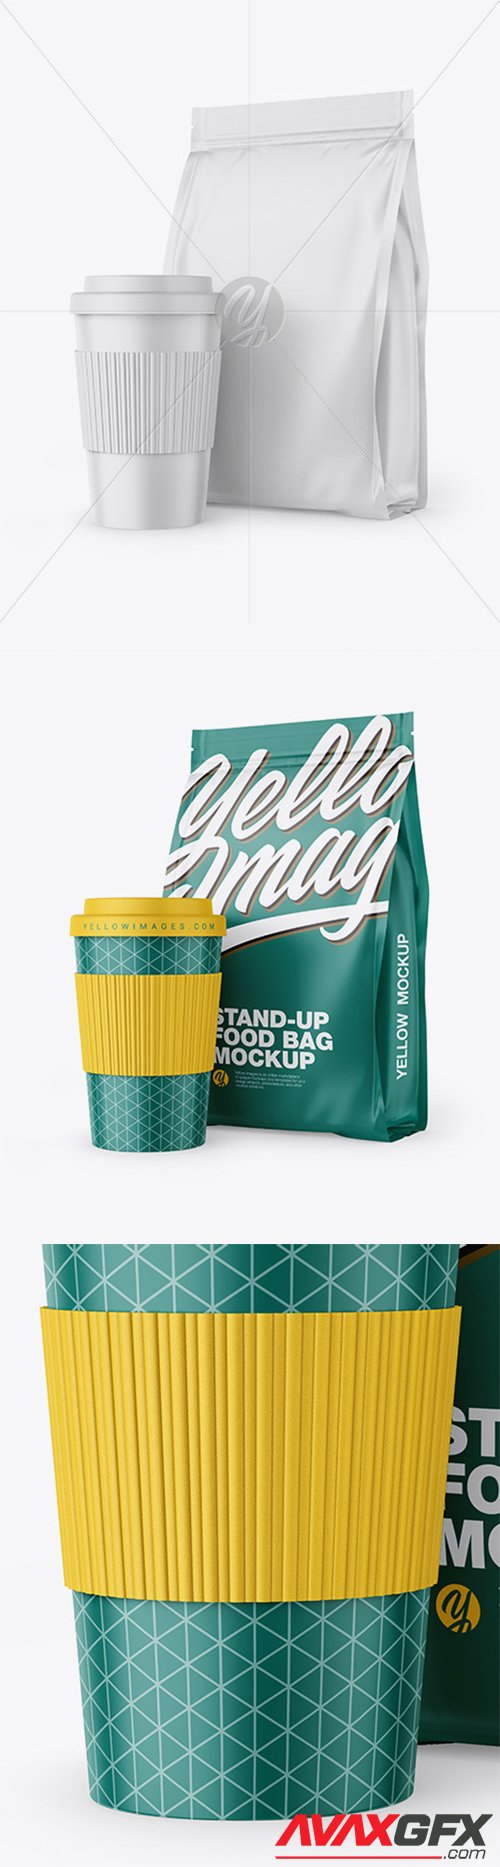 Download Matte Stand Up Bag With Coffee Cup Mockup 64586 Avaxgfx All Downloads That You Need In One Place Graphic From Nitroflare Rapidgator PSD Mockup Templates